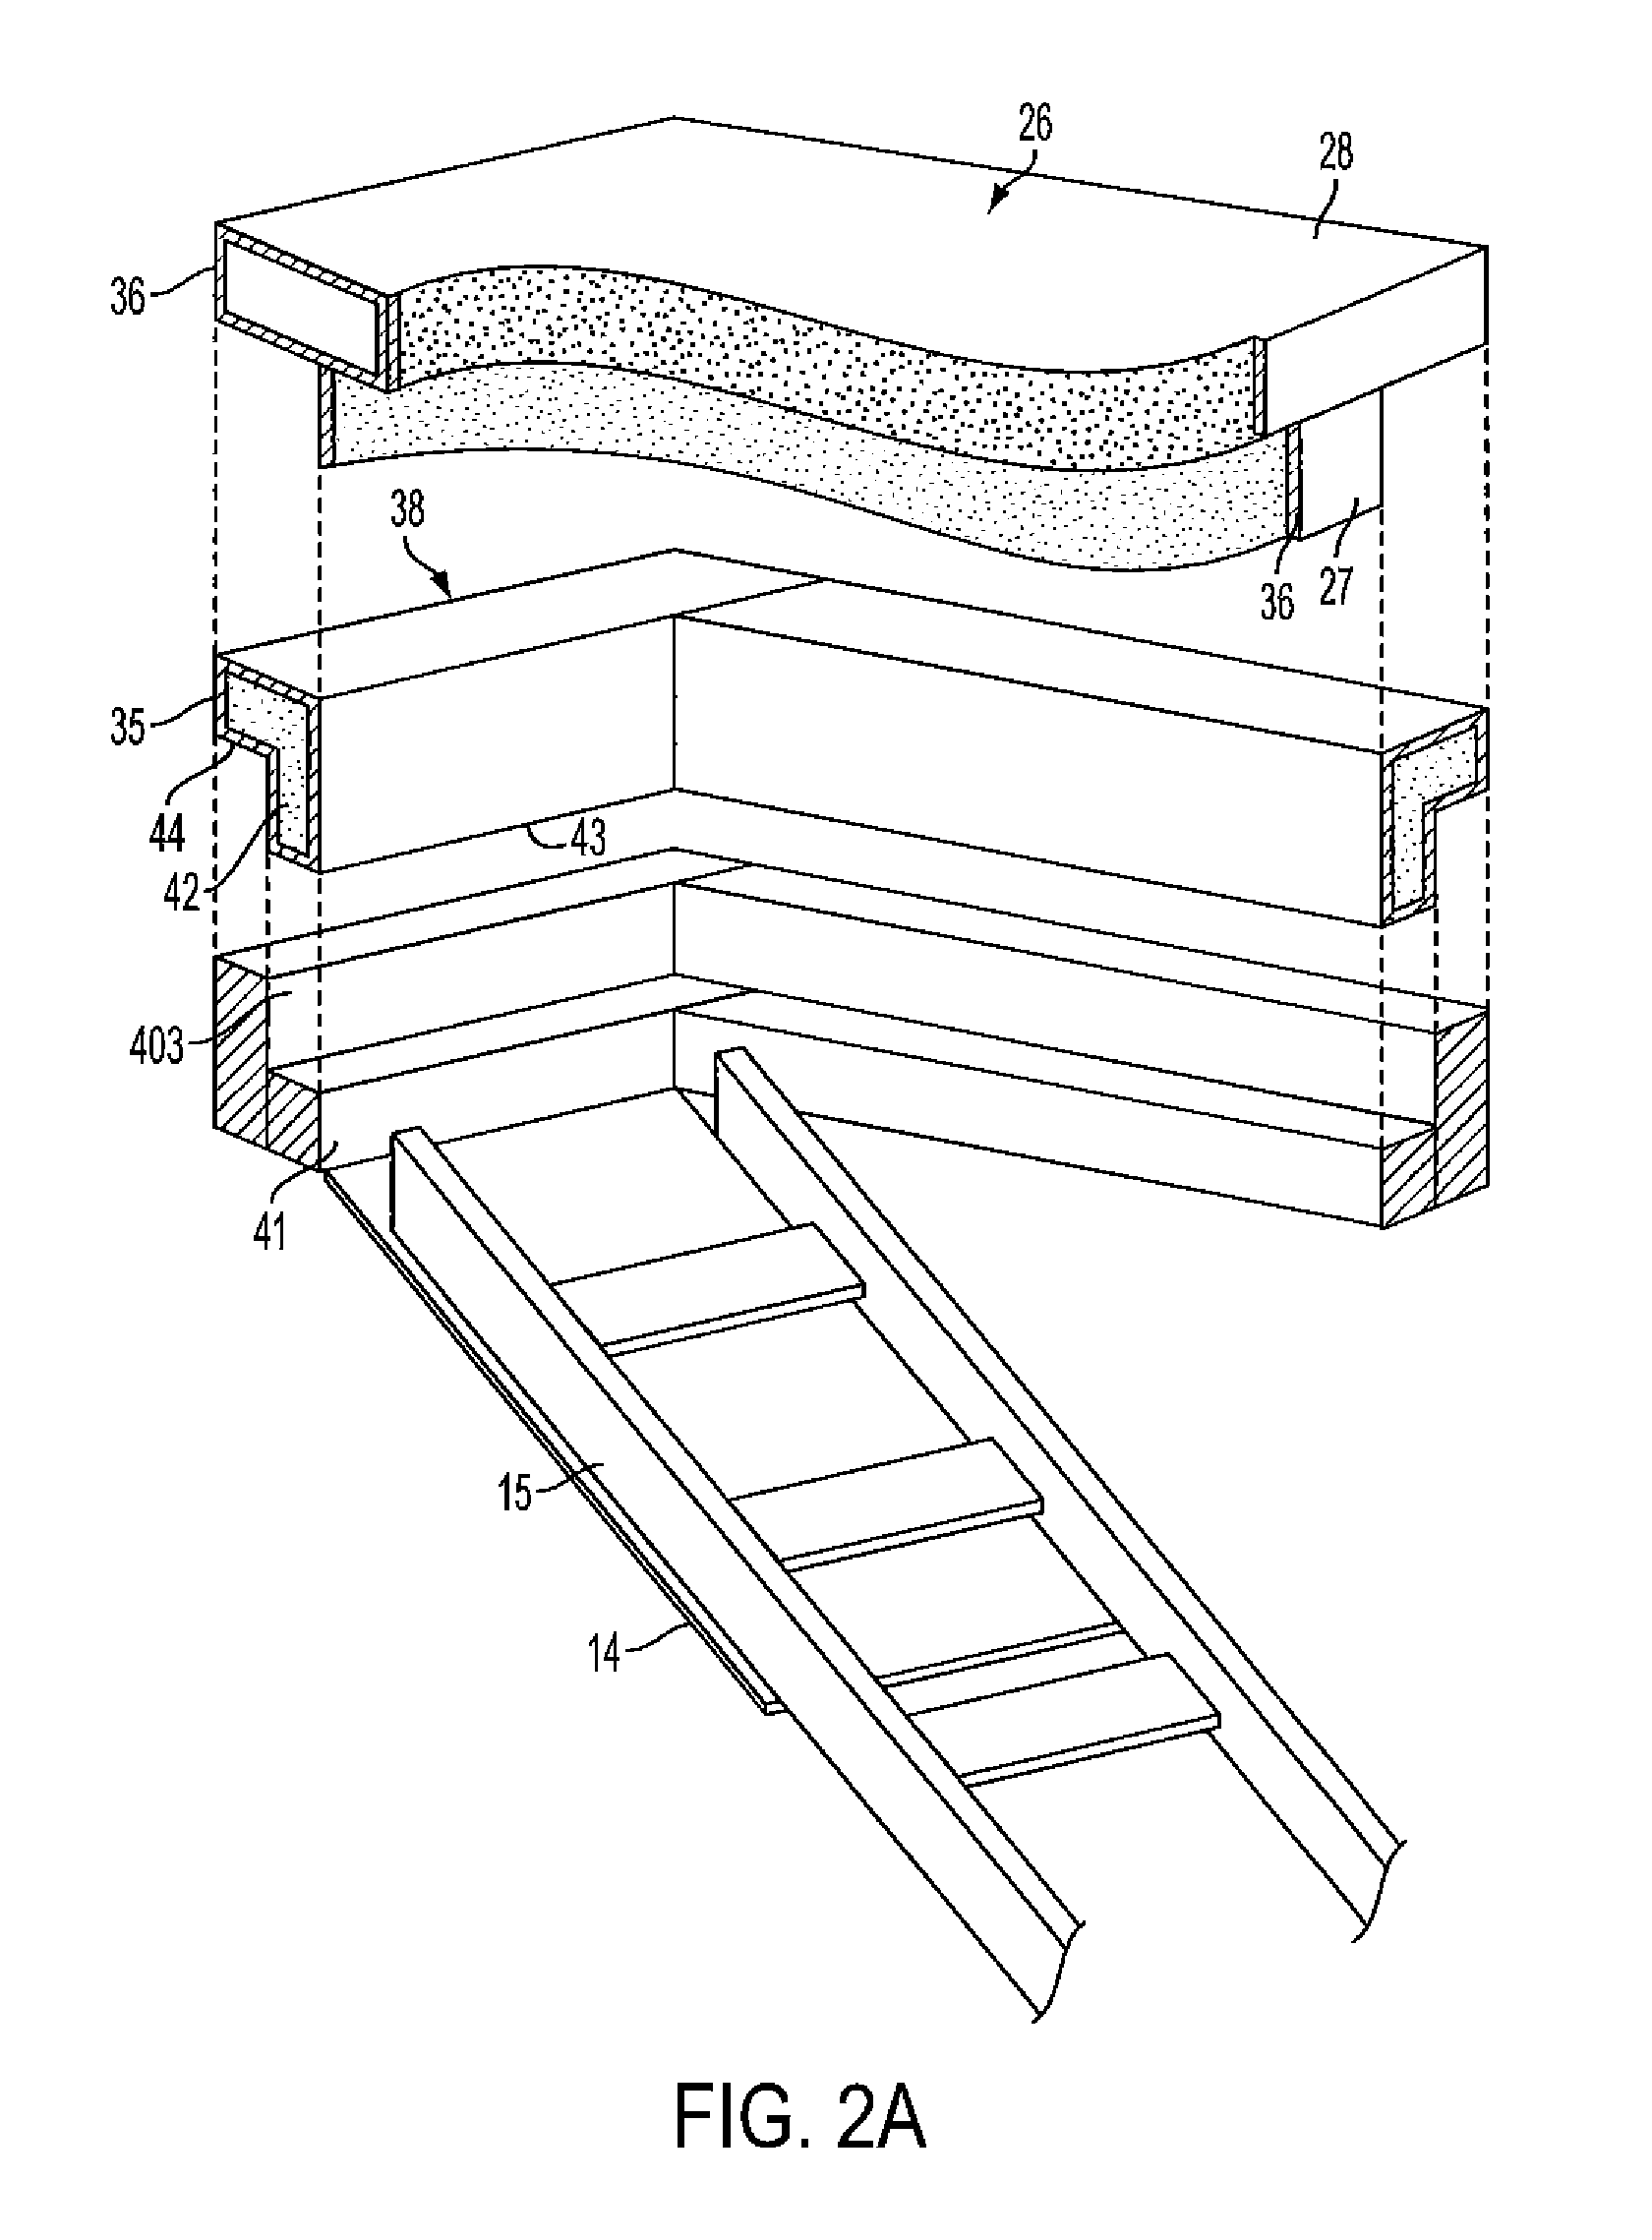 Systems and methods for insulating attic openings